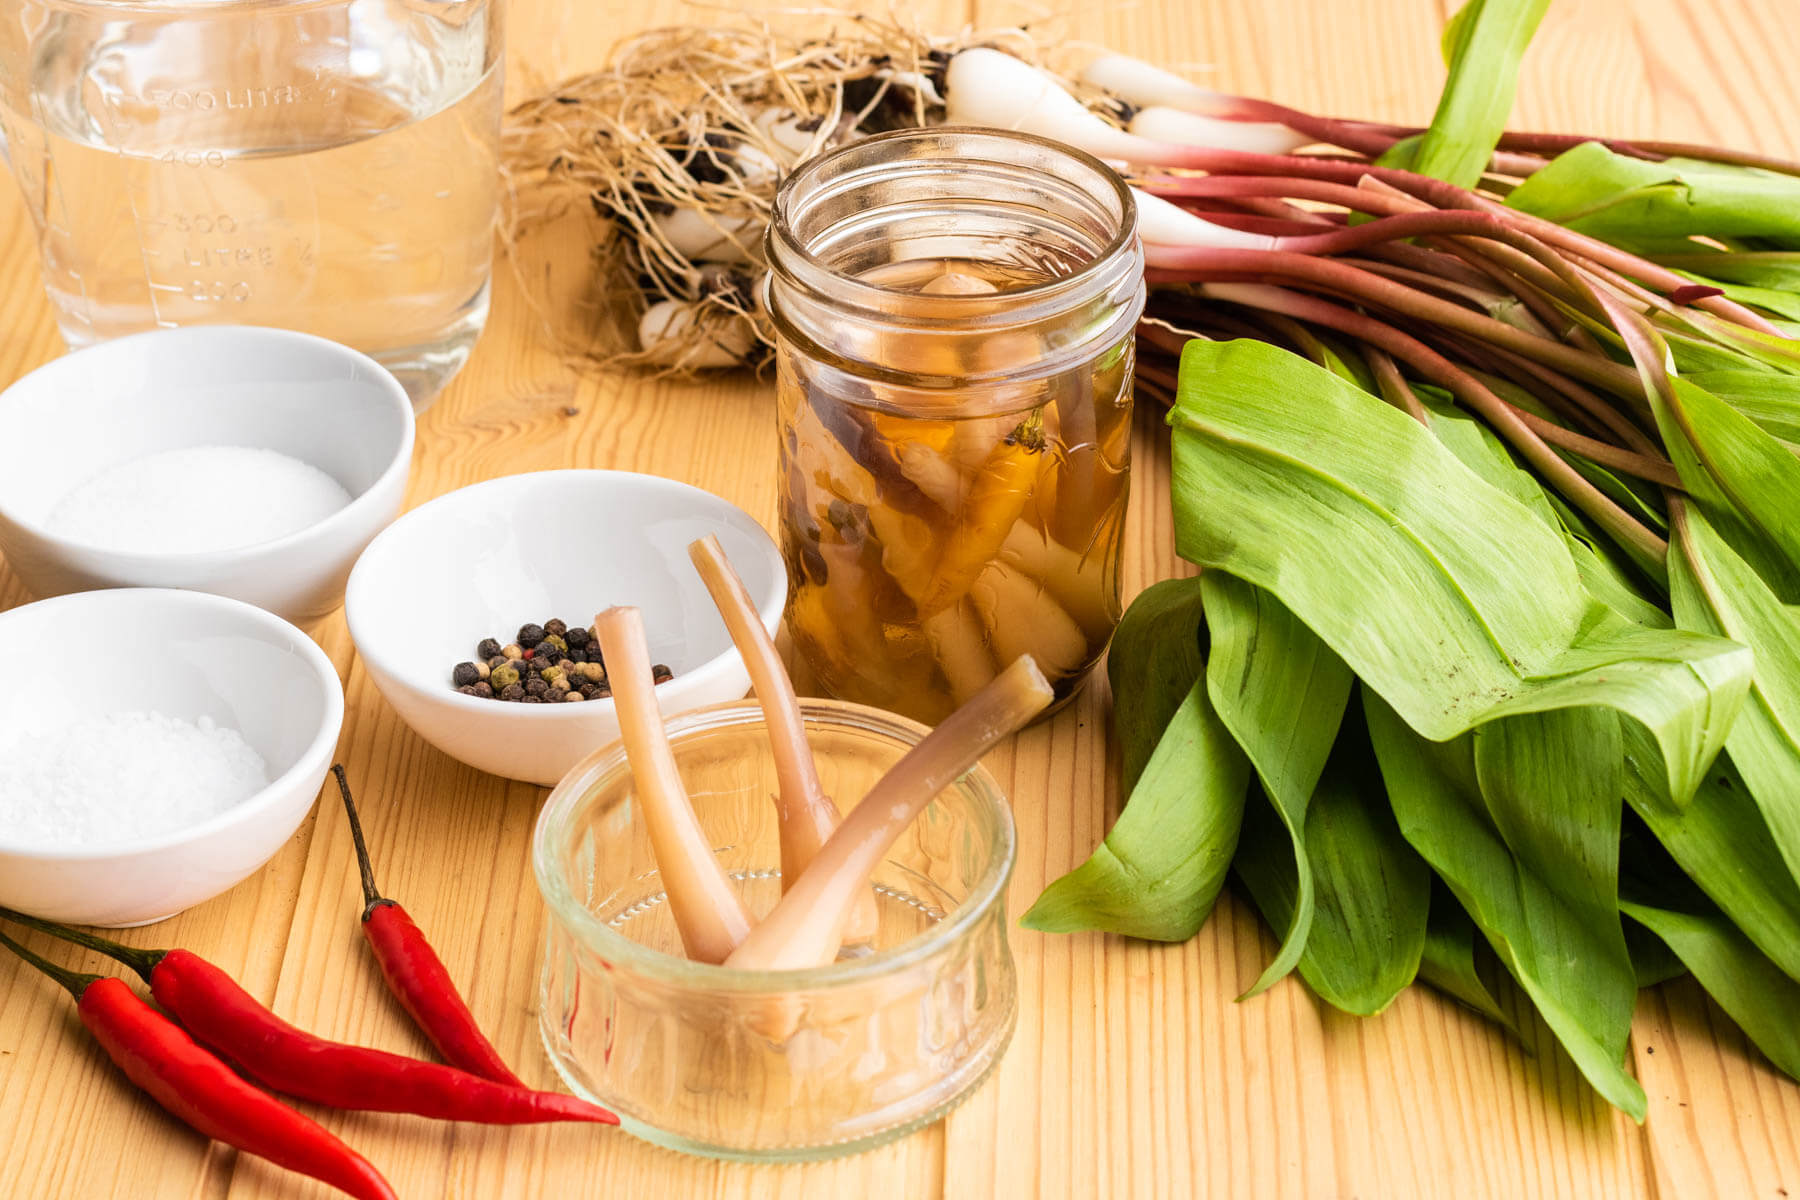 Ingredients used to sweet pickle wild ramps.